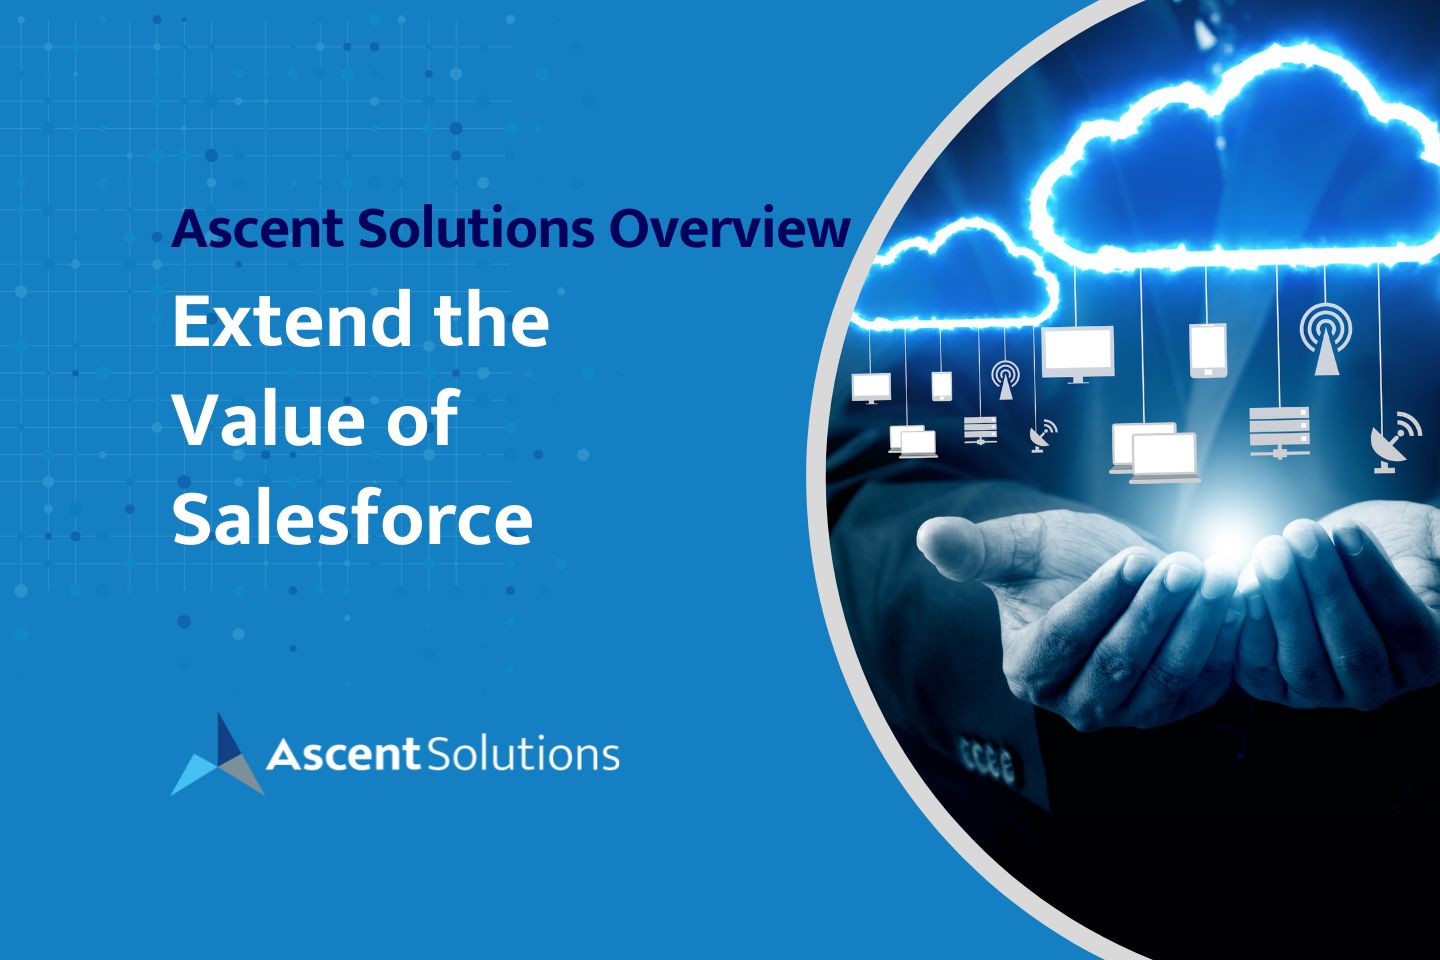 Ascent Solutions Overview- Extend the Value of Salesforce